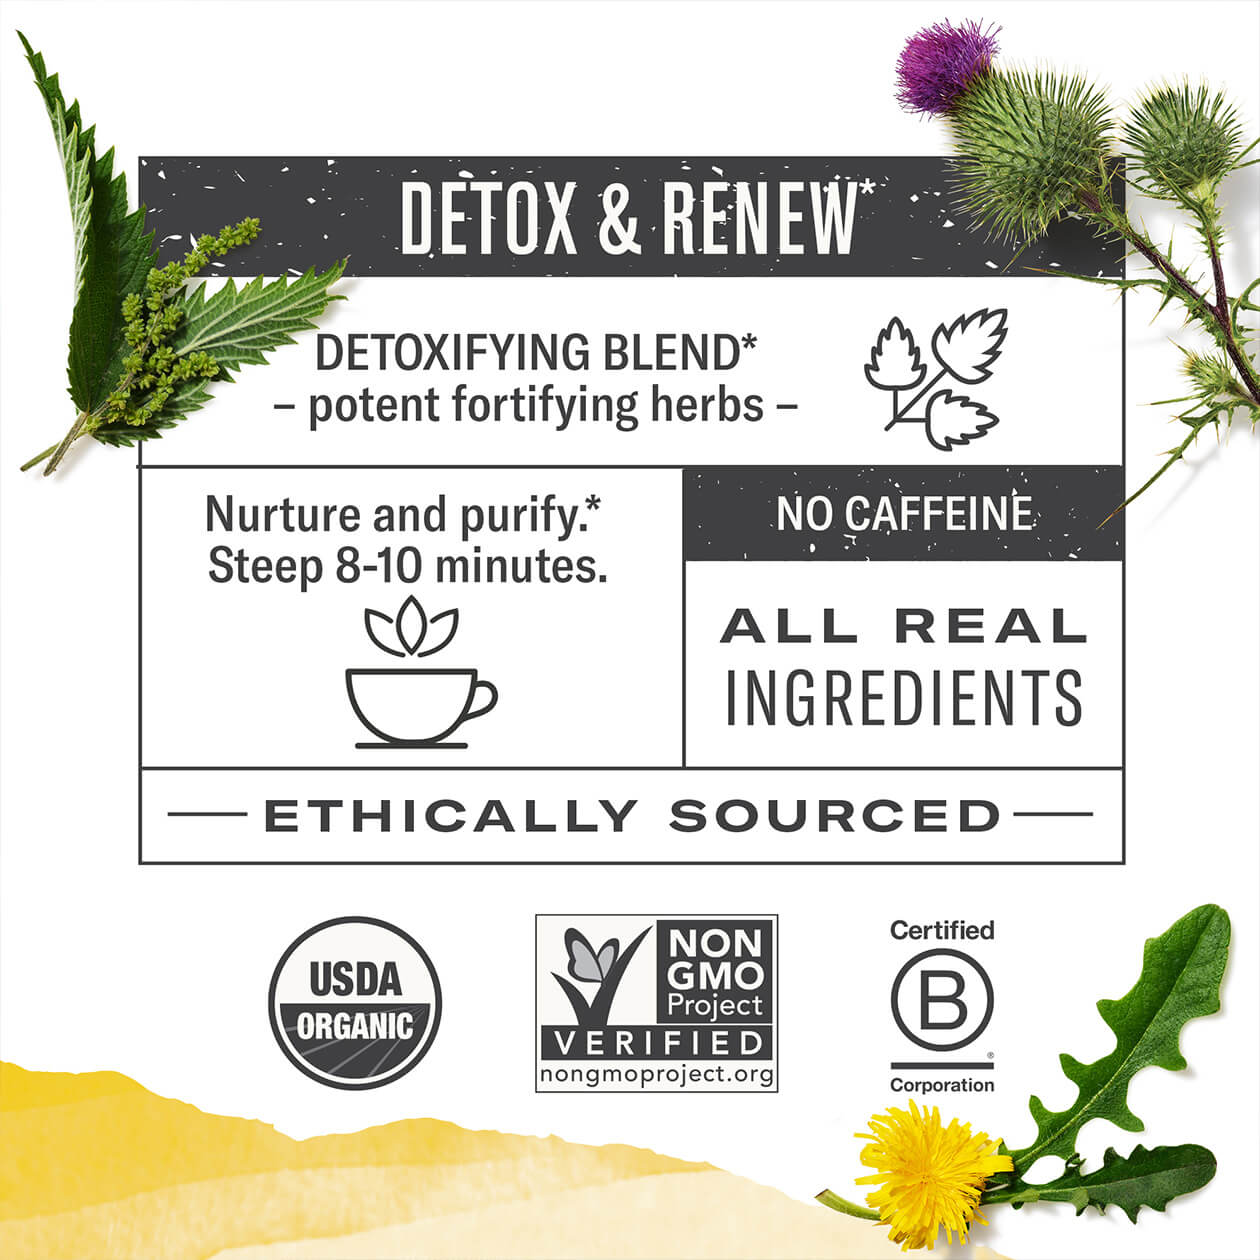 Infographic about Dandelion Detox: steep 8-10 minutes, caffeine free, all real ingredients, ethically sourced